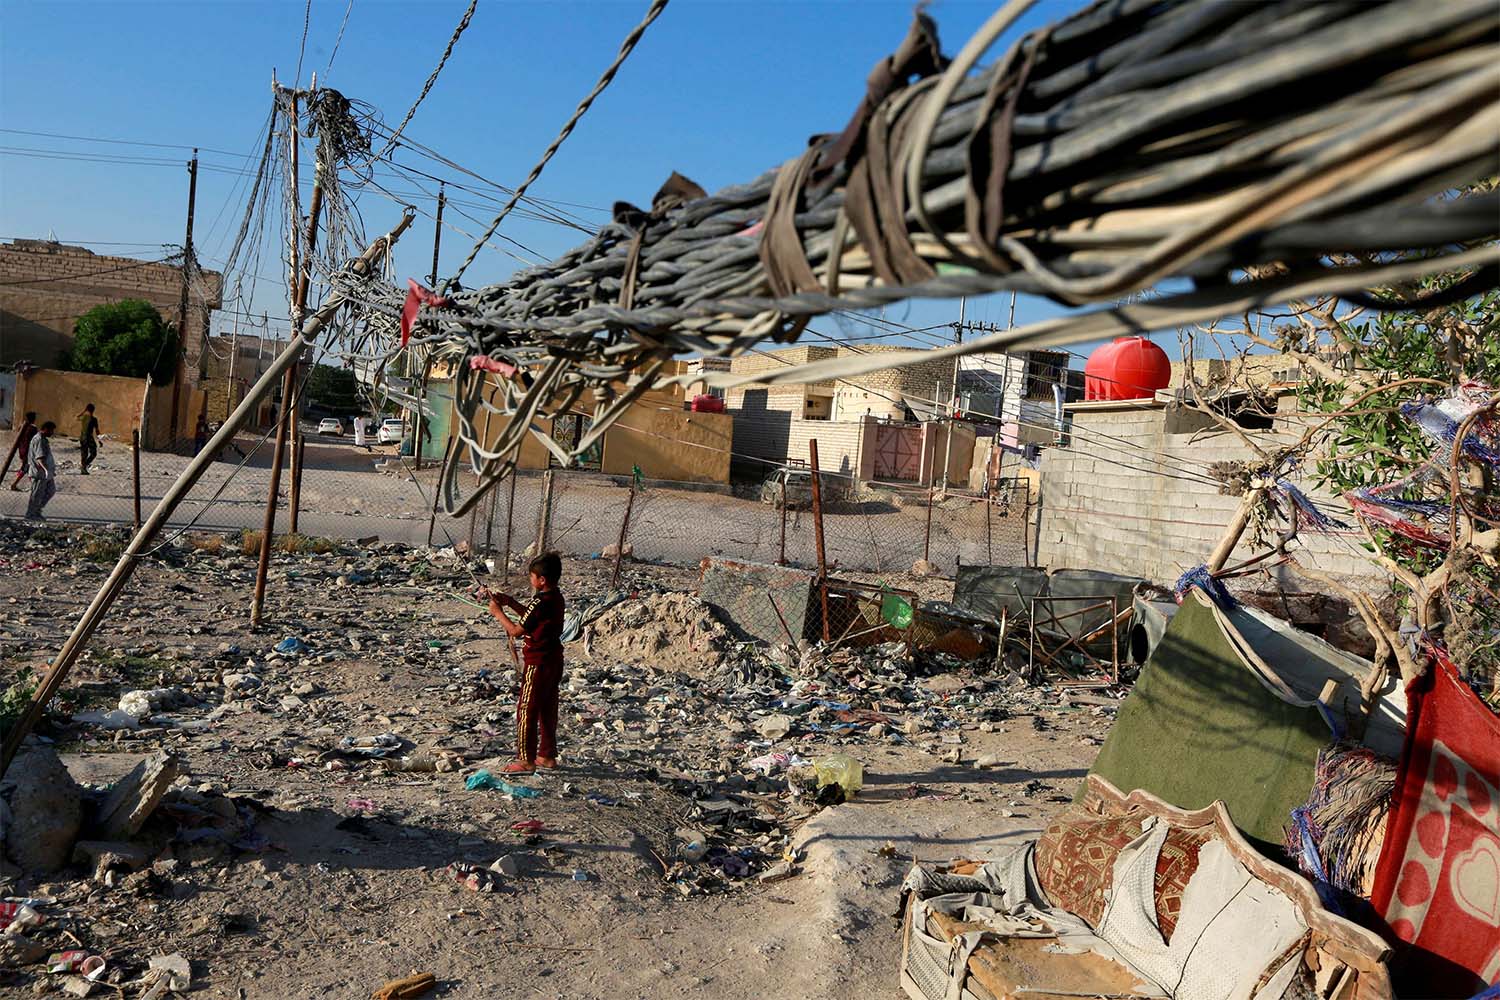 A view of the wire chaos of generator distribution of electricity in Najaf